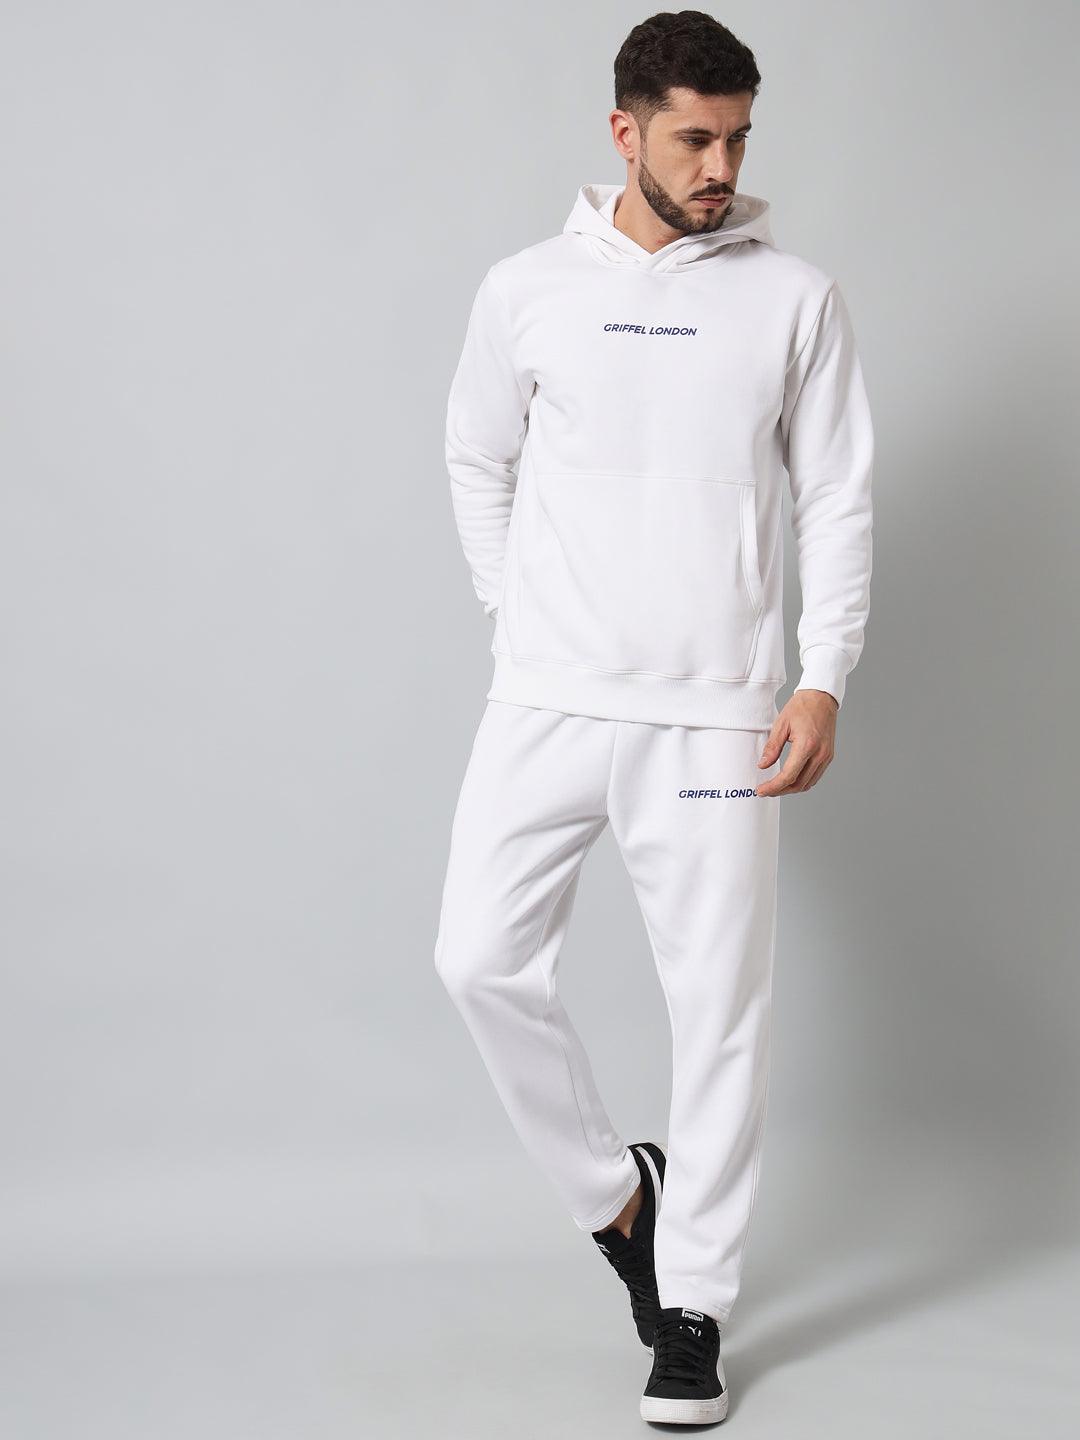 Griffel Men's Front Logo Solid Fleece Basic Hoodie and Joggers Full set White Tracksuit - griffel